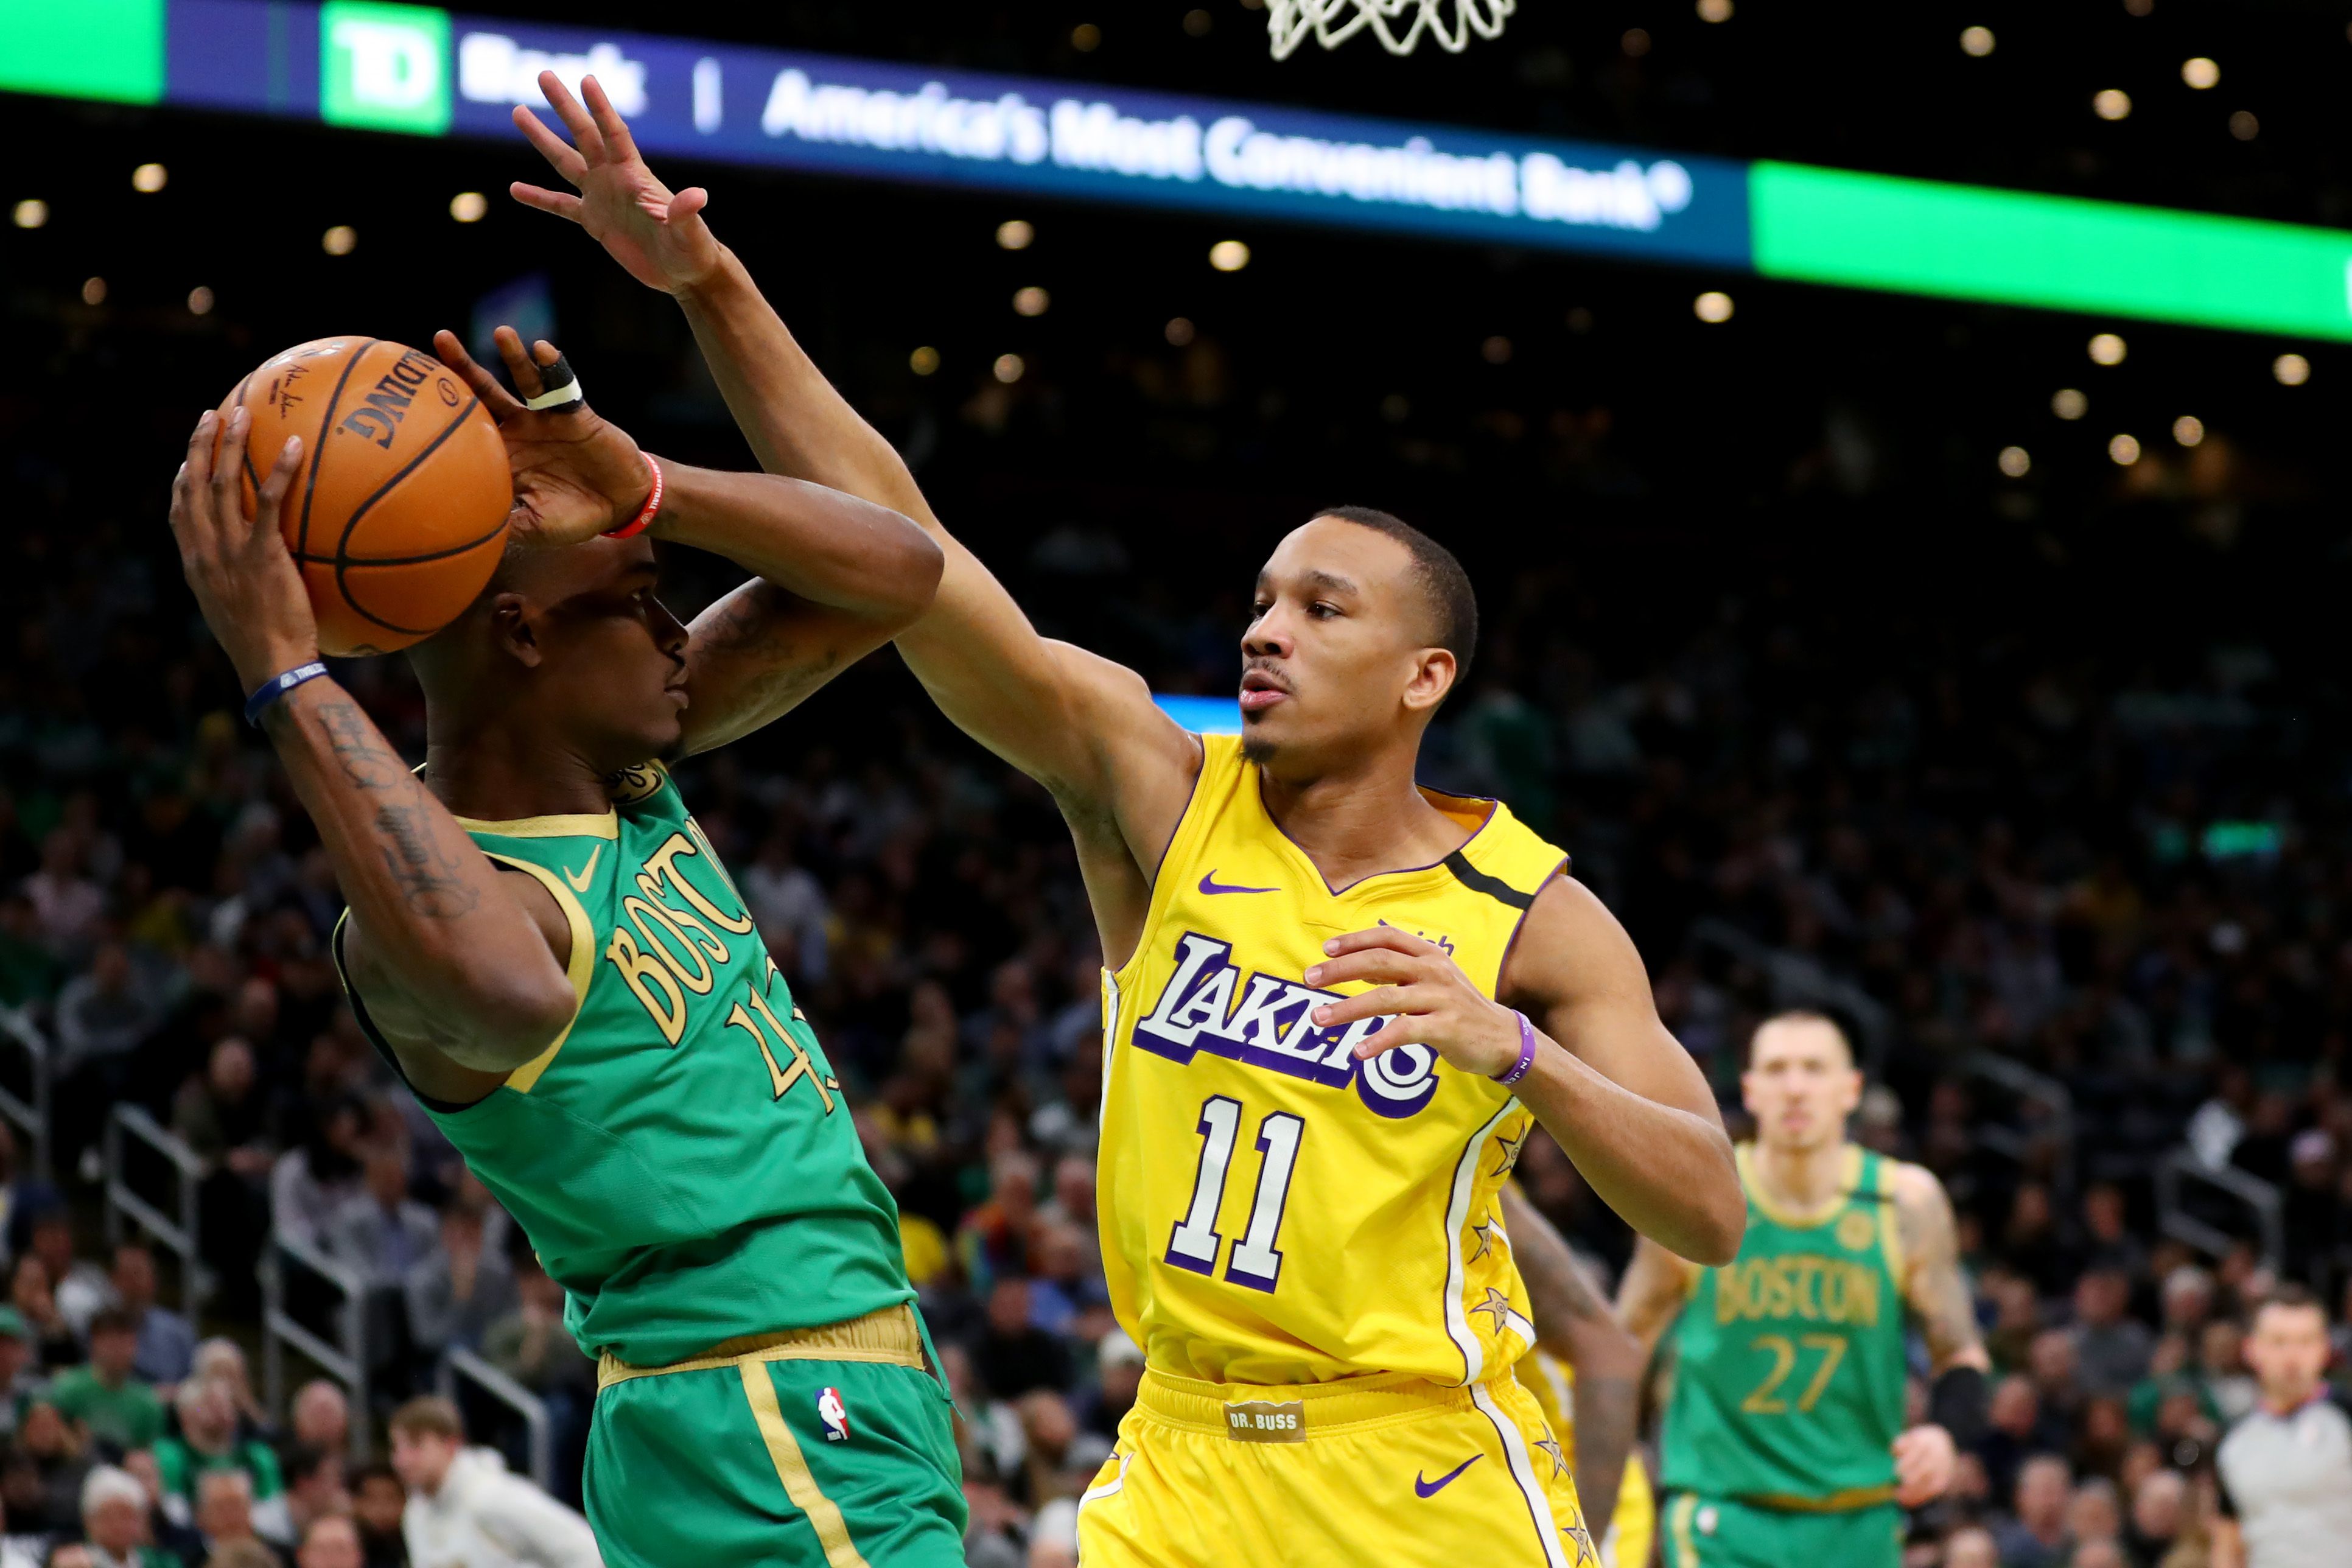 Avery Bradley is done with Lakers, will sign with Heat - Los